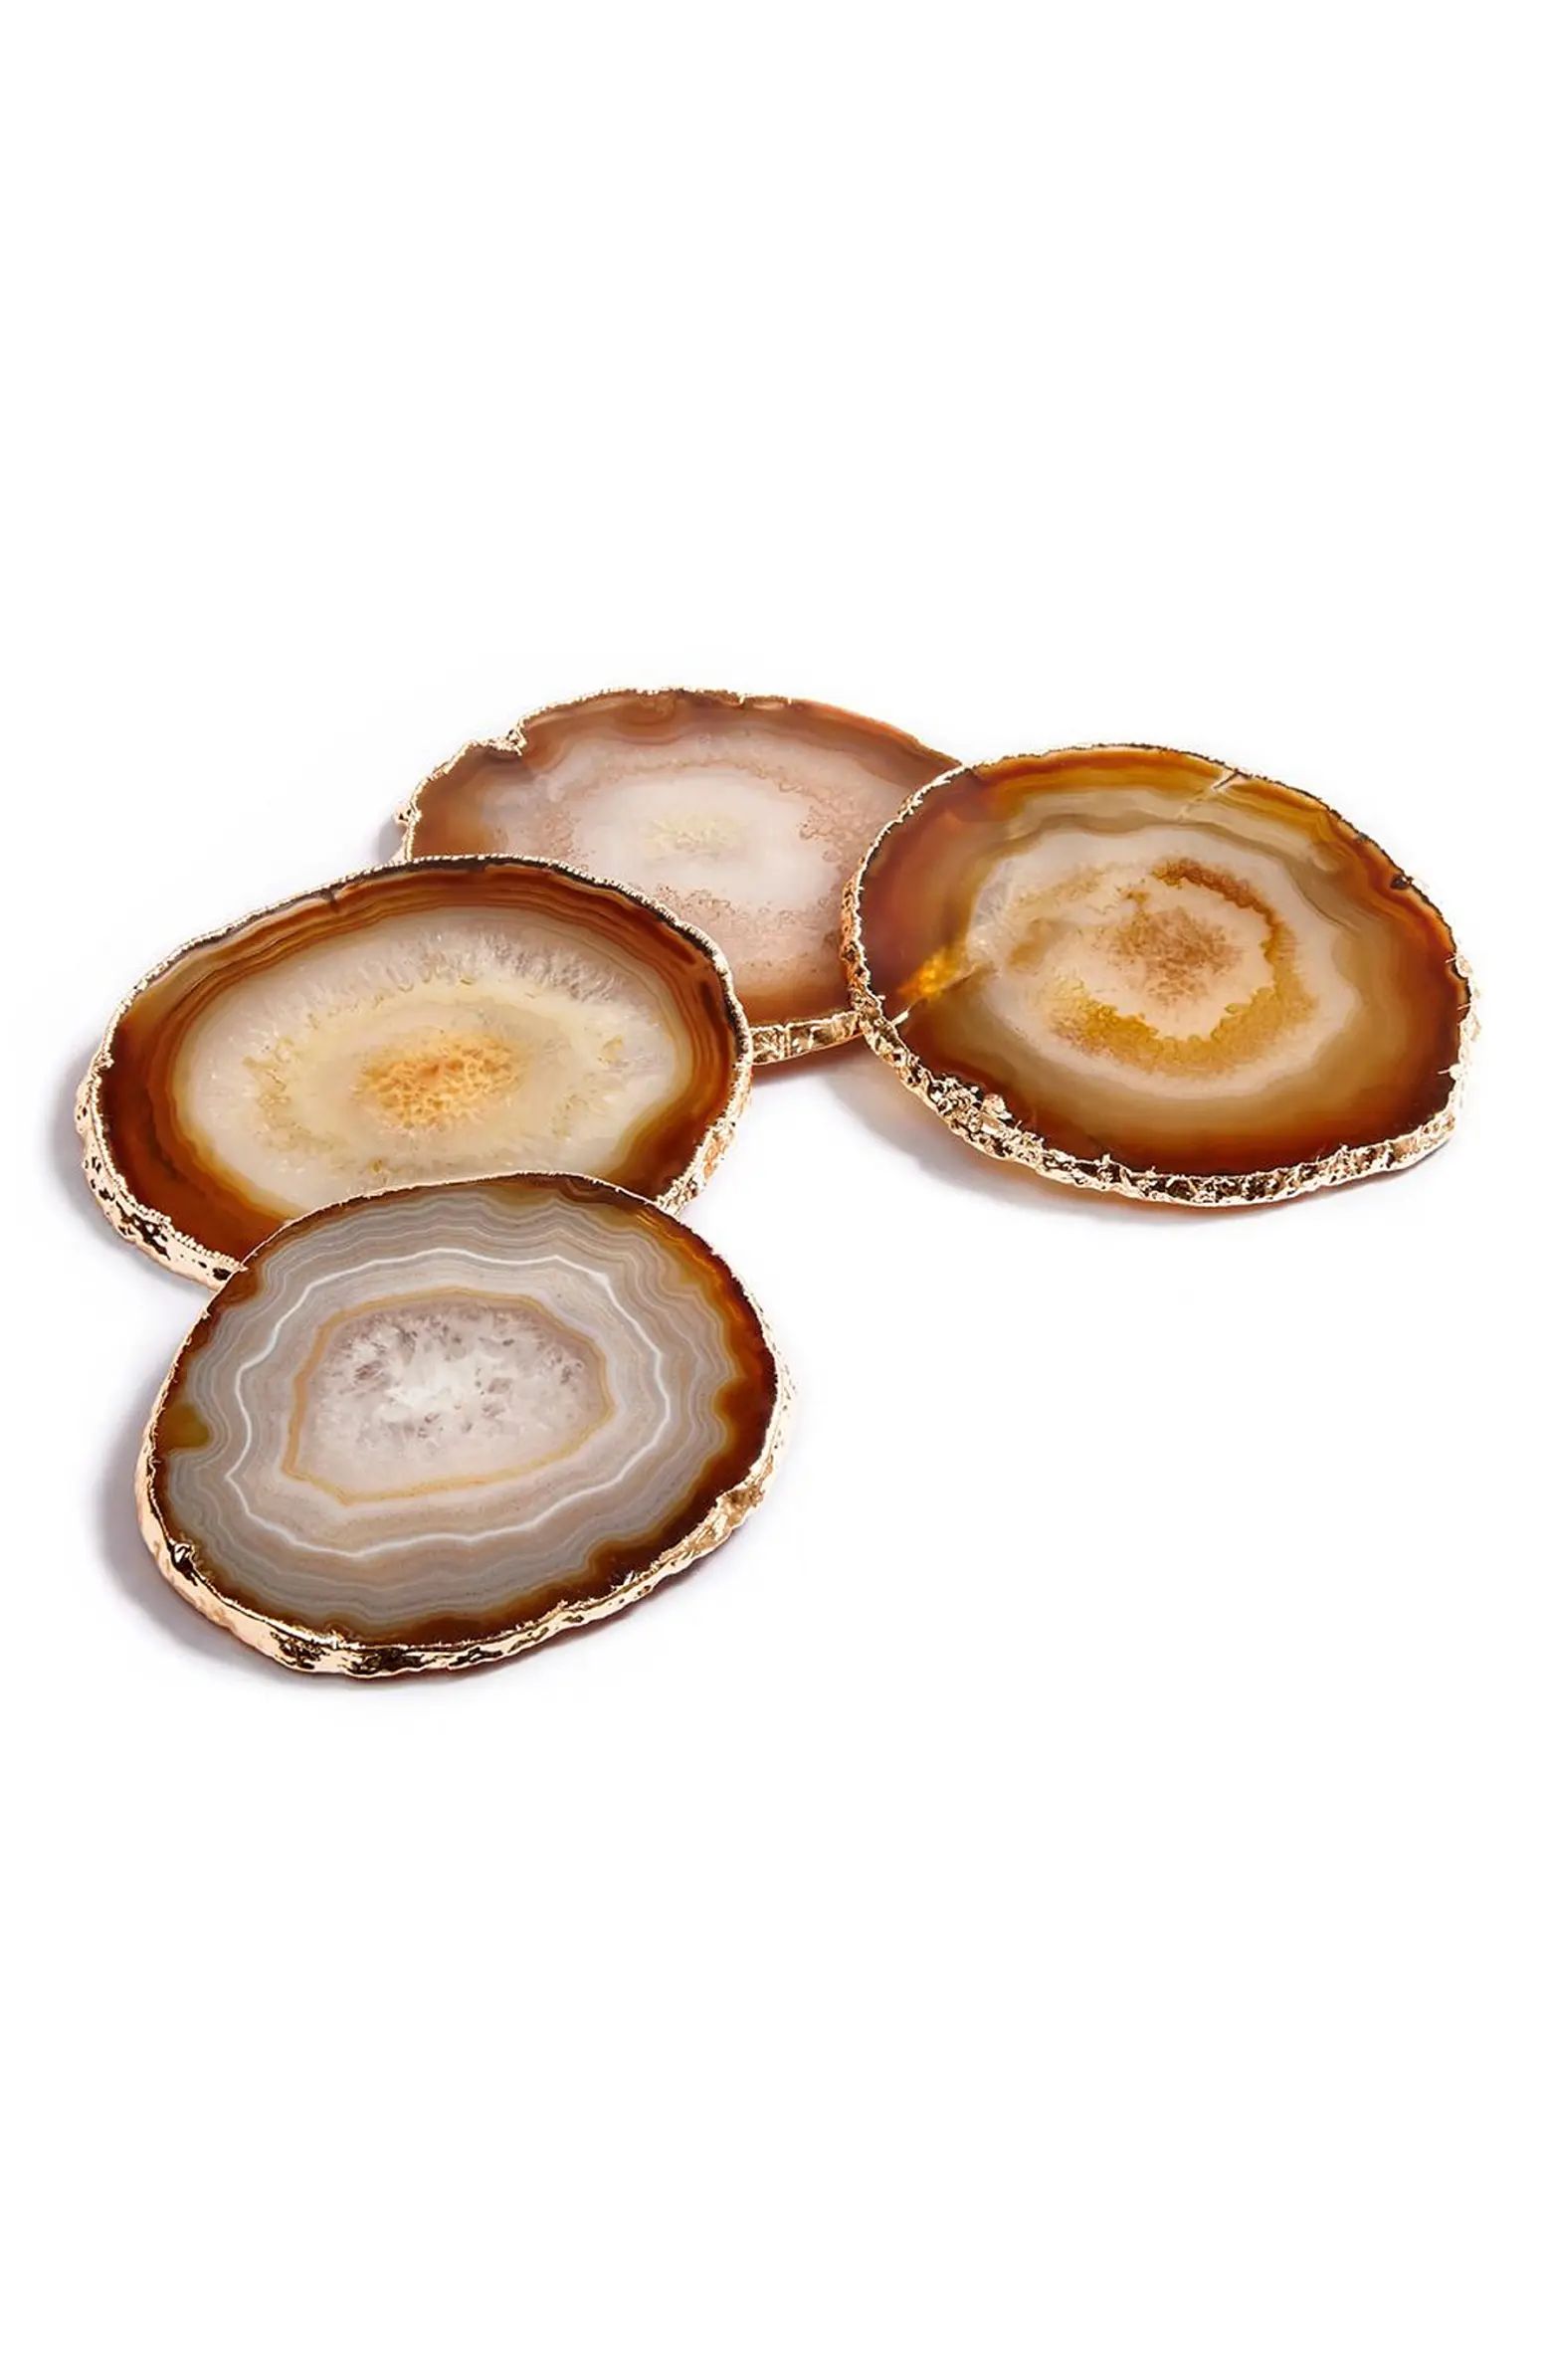 ANNA New York Lumino Set of 4 Agate Coasters | Nordstrom | Nordstrom